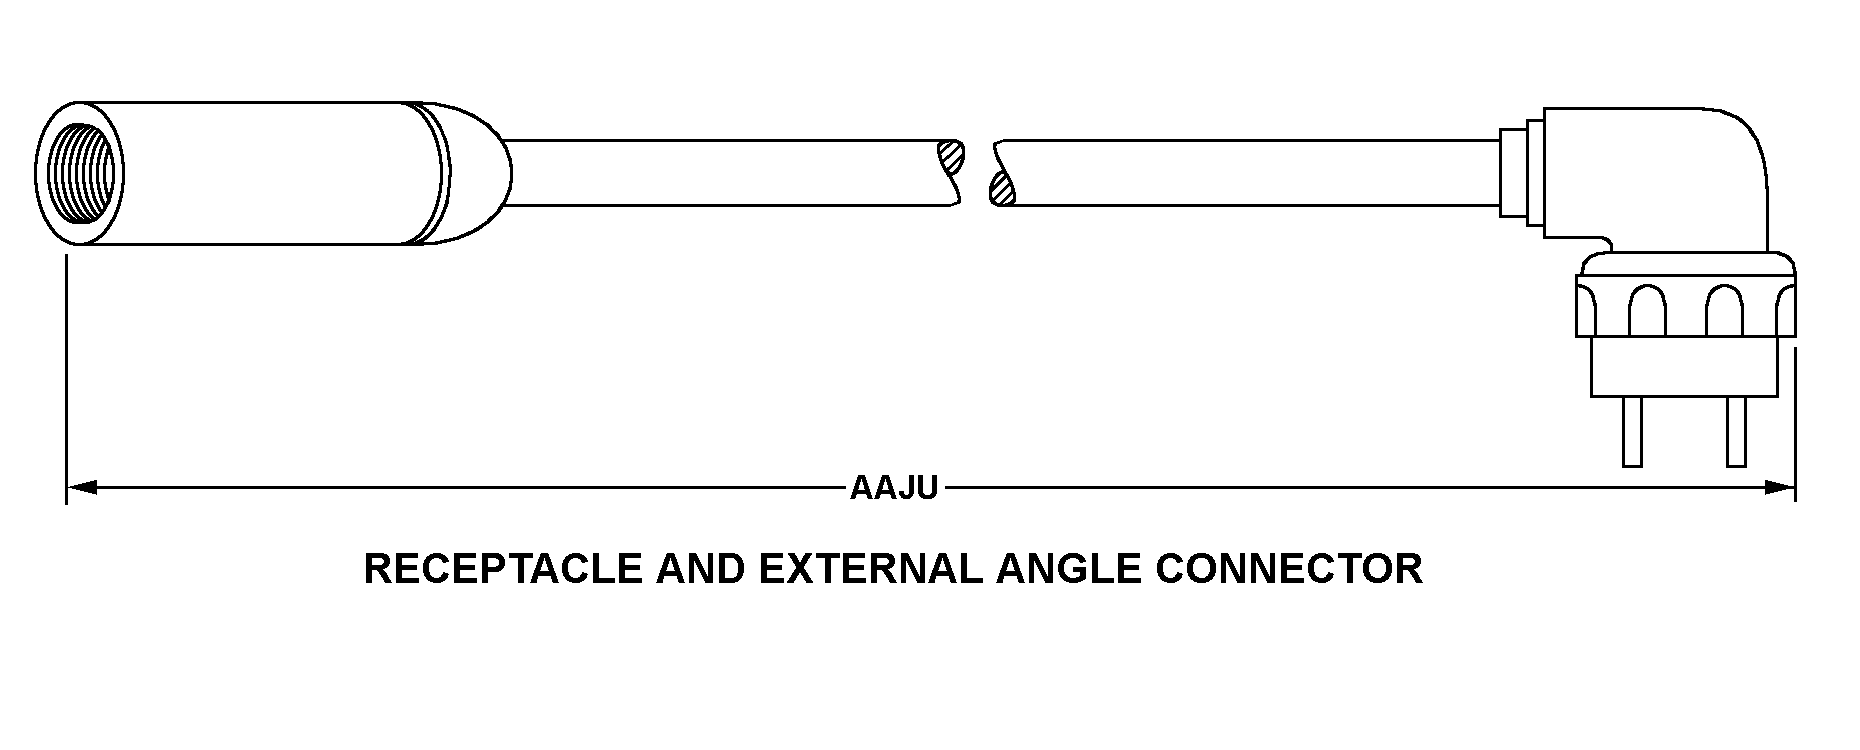 RECEPTACLE AND EXTERNAL ANGLE CONNECTOR style nsn 5995-01-079-3266